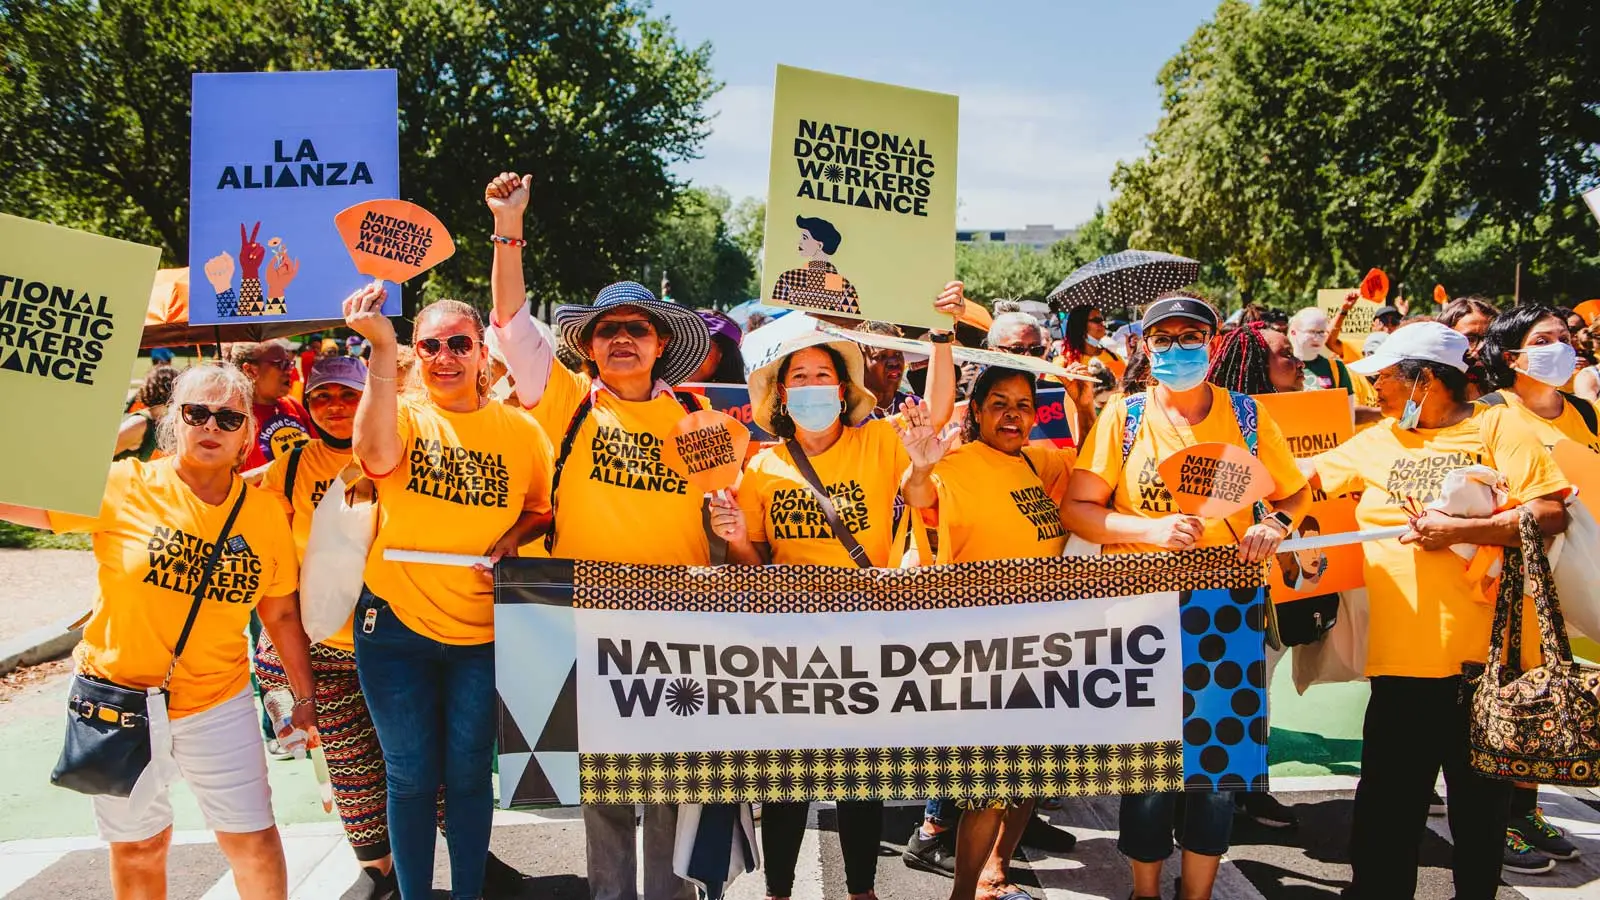 On a sunny day, demonstrators from National Domestic Workers Alliance hold signs and a banner with the organization’s name in bold font and colorful patterns. They’re smiling and wearing bright gold t-shirts. 